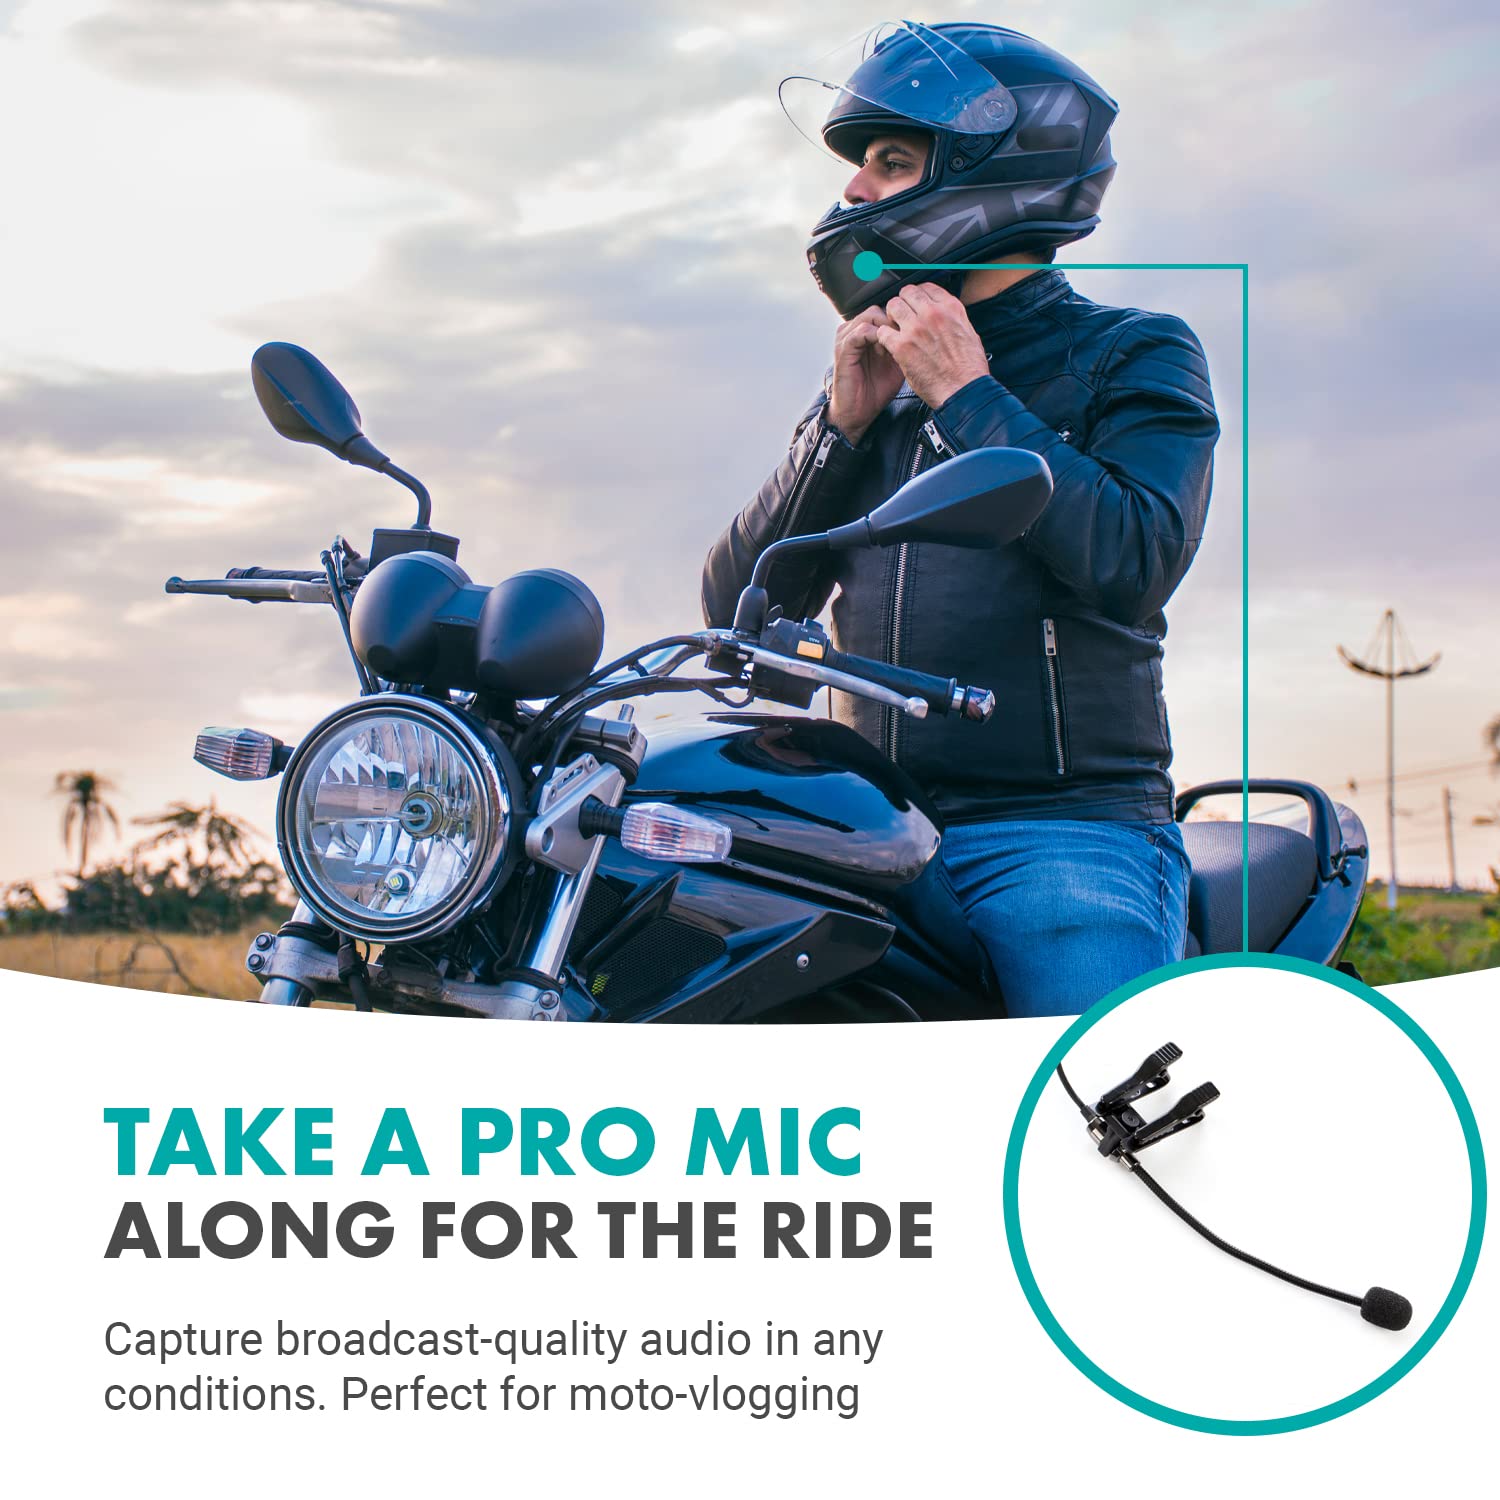 Movo ACM400 Flexible Gooseneck Omnidirectional Microphone for Motovlogging Moto Vlog Action Cam Helmet Mic - Clip on Microphone for Motorcycle Vloggers - Compatible with GoPro Media Mod  - Acceptable